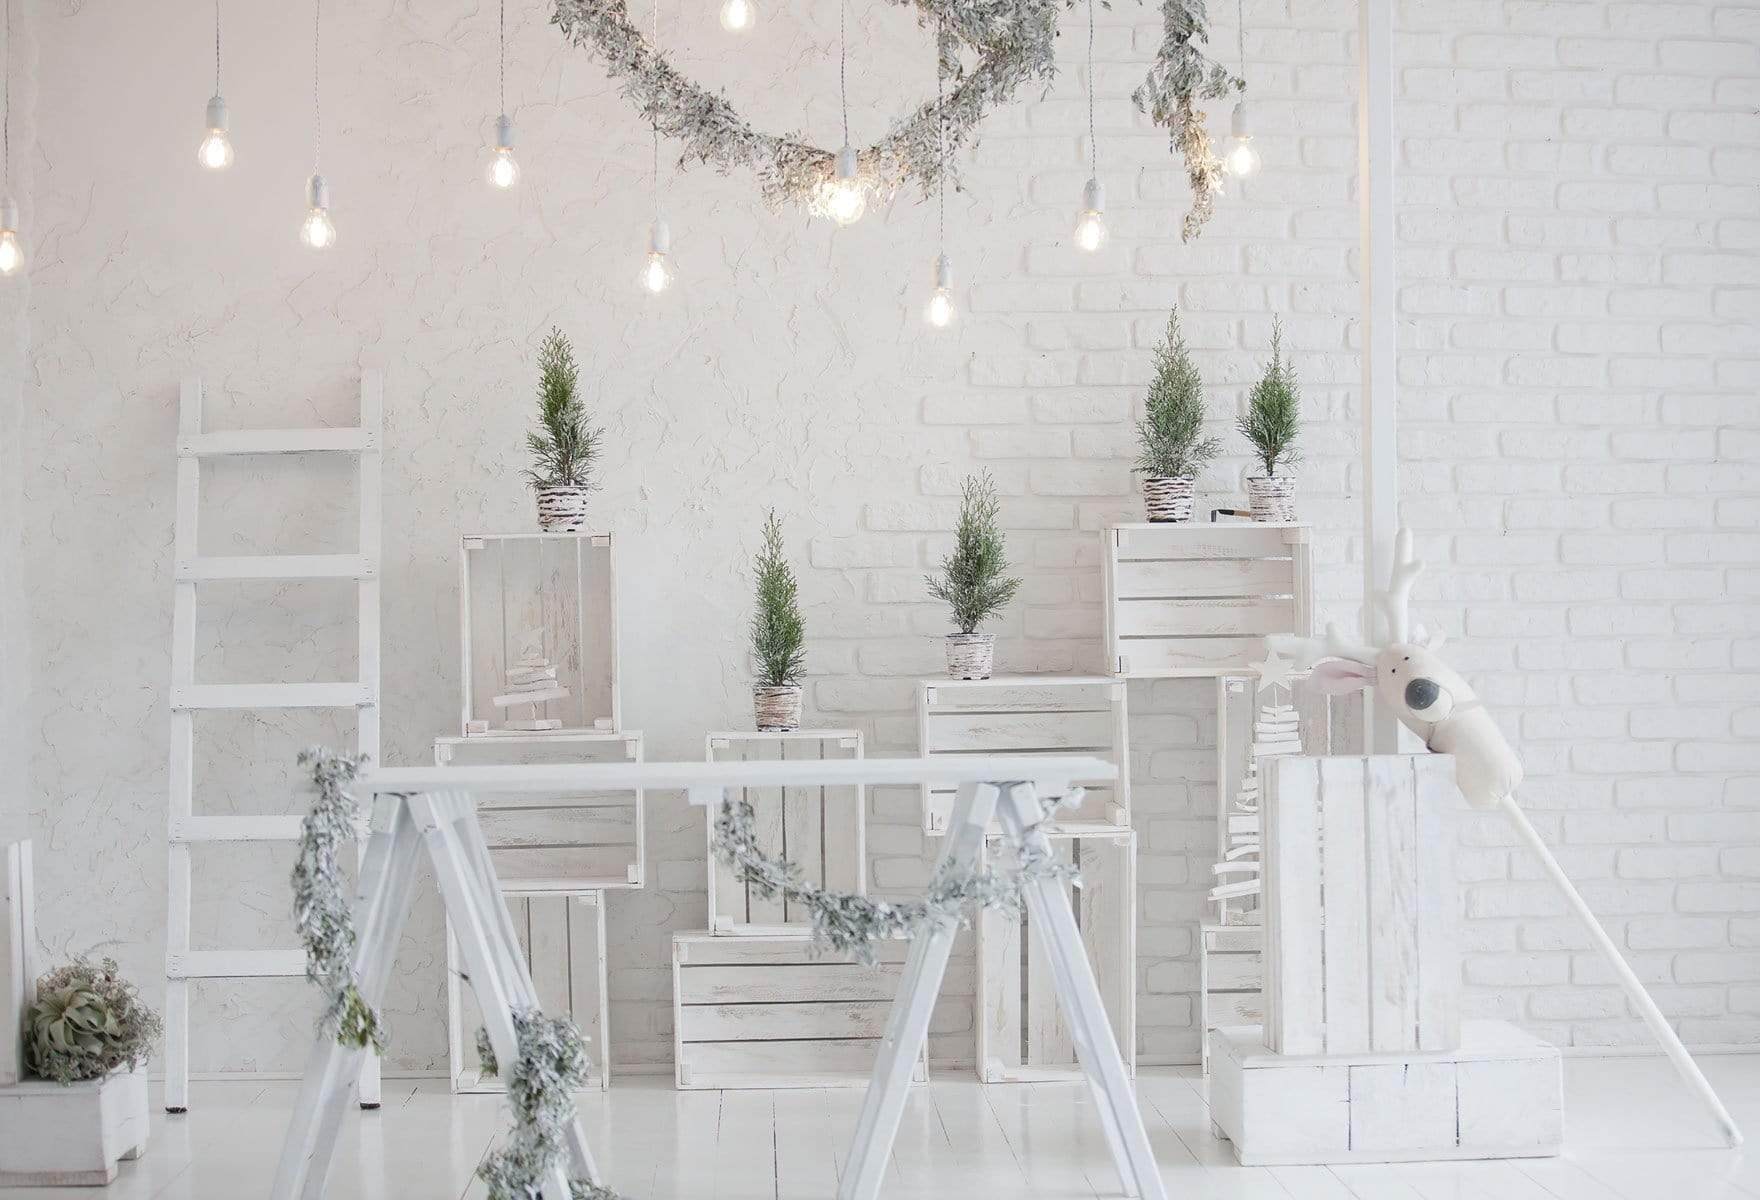 Katebackdrop£ºKate Christmas White Room with Potted Plant Decorations Backdrop